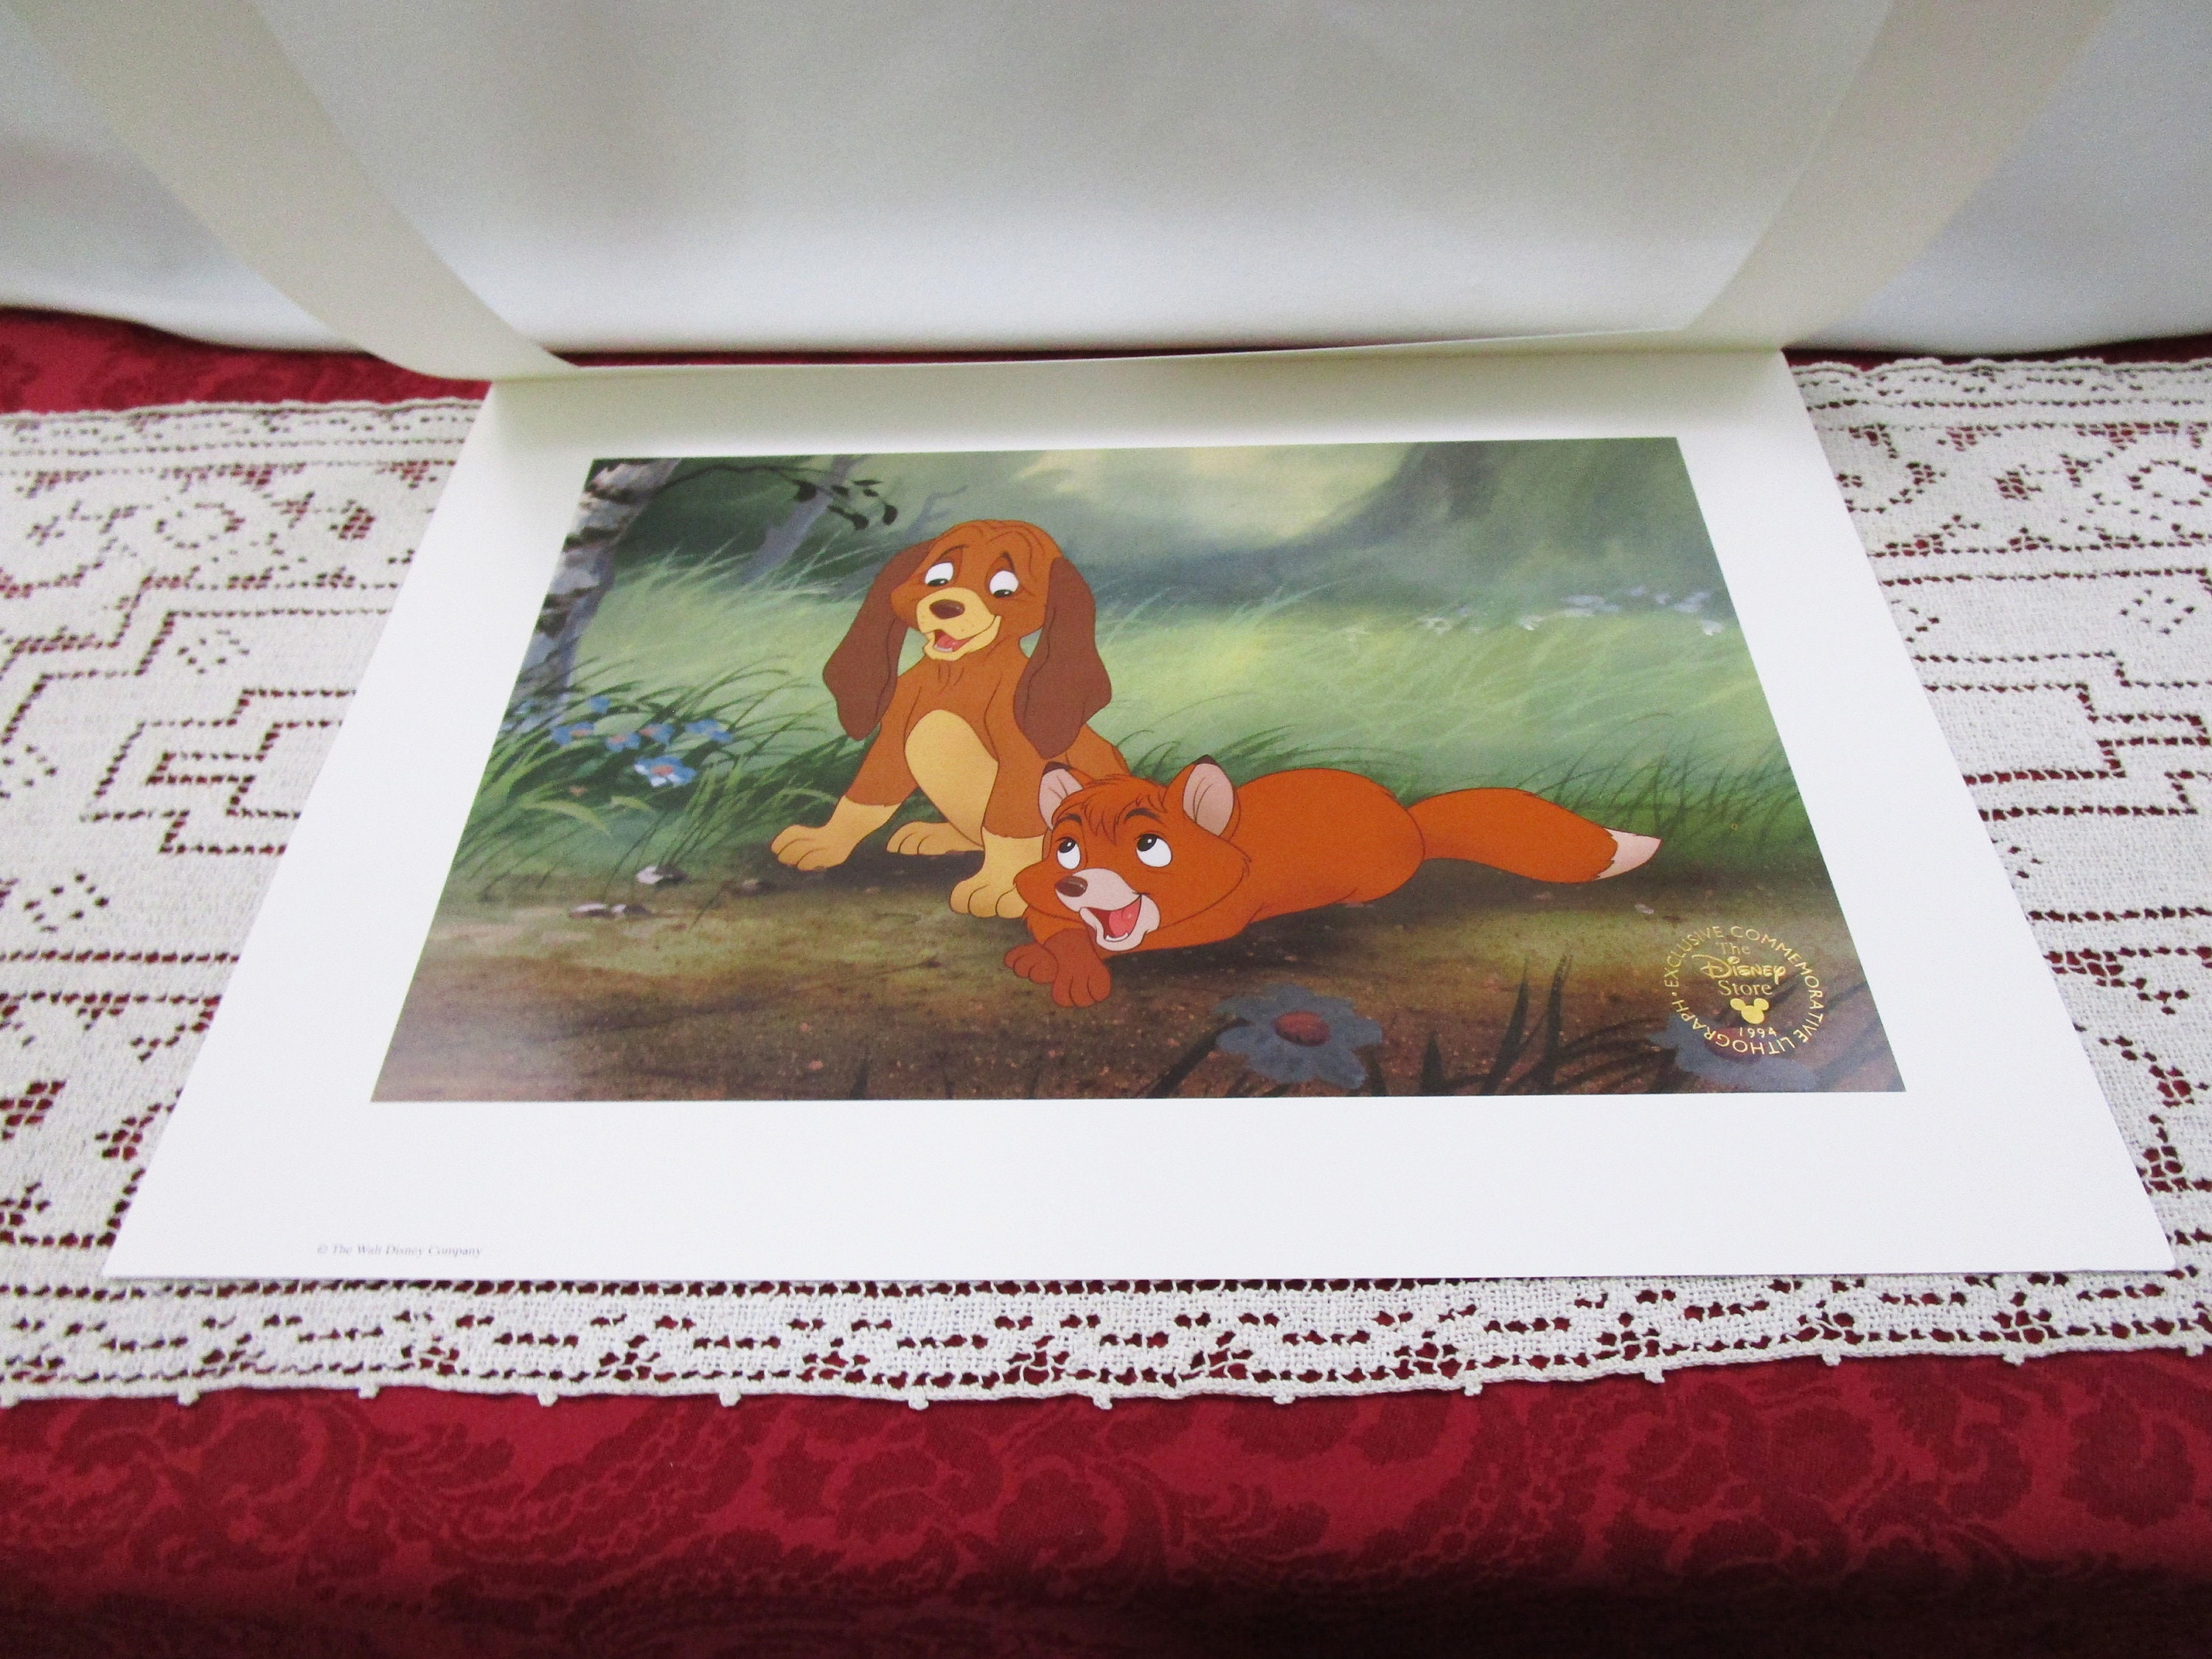 Vintage Disney 1994 Fox And The Hound Commemorative Lithograph Disney Store Exclusive Printed In The Usa Tod Vixen Chopper Chief